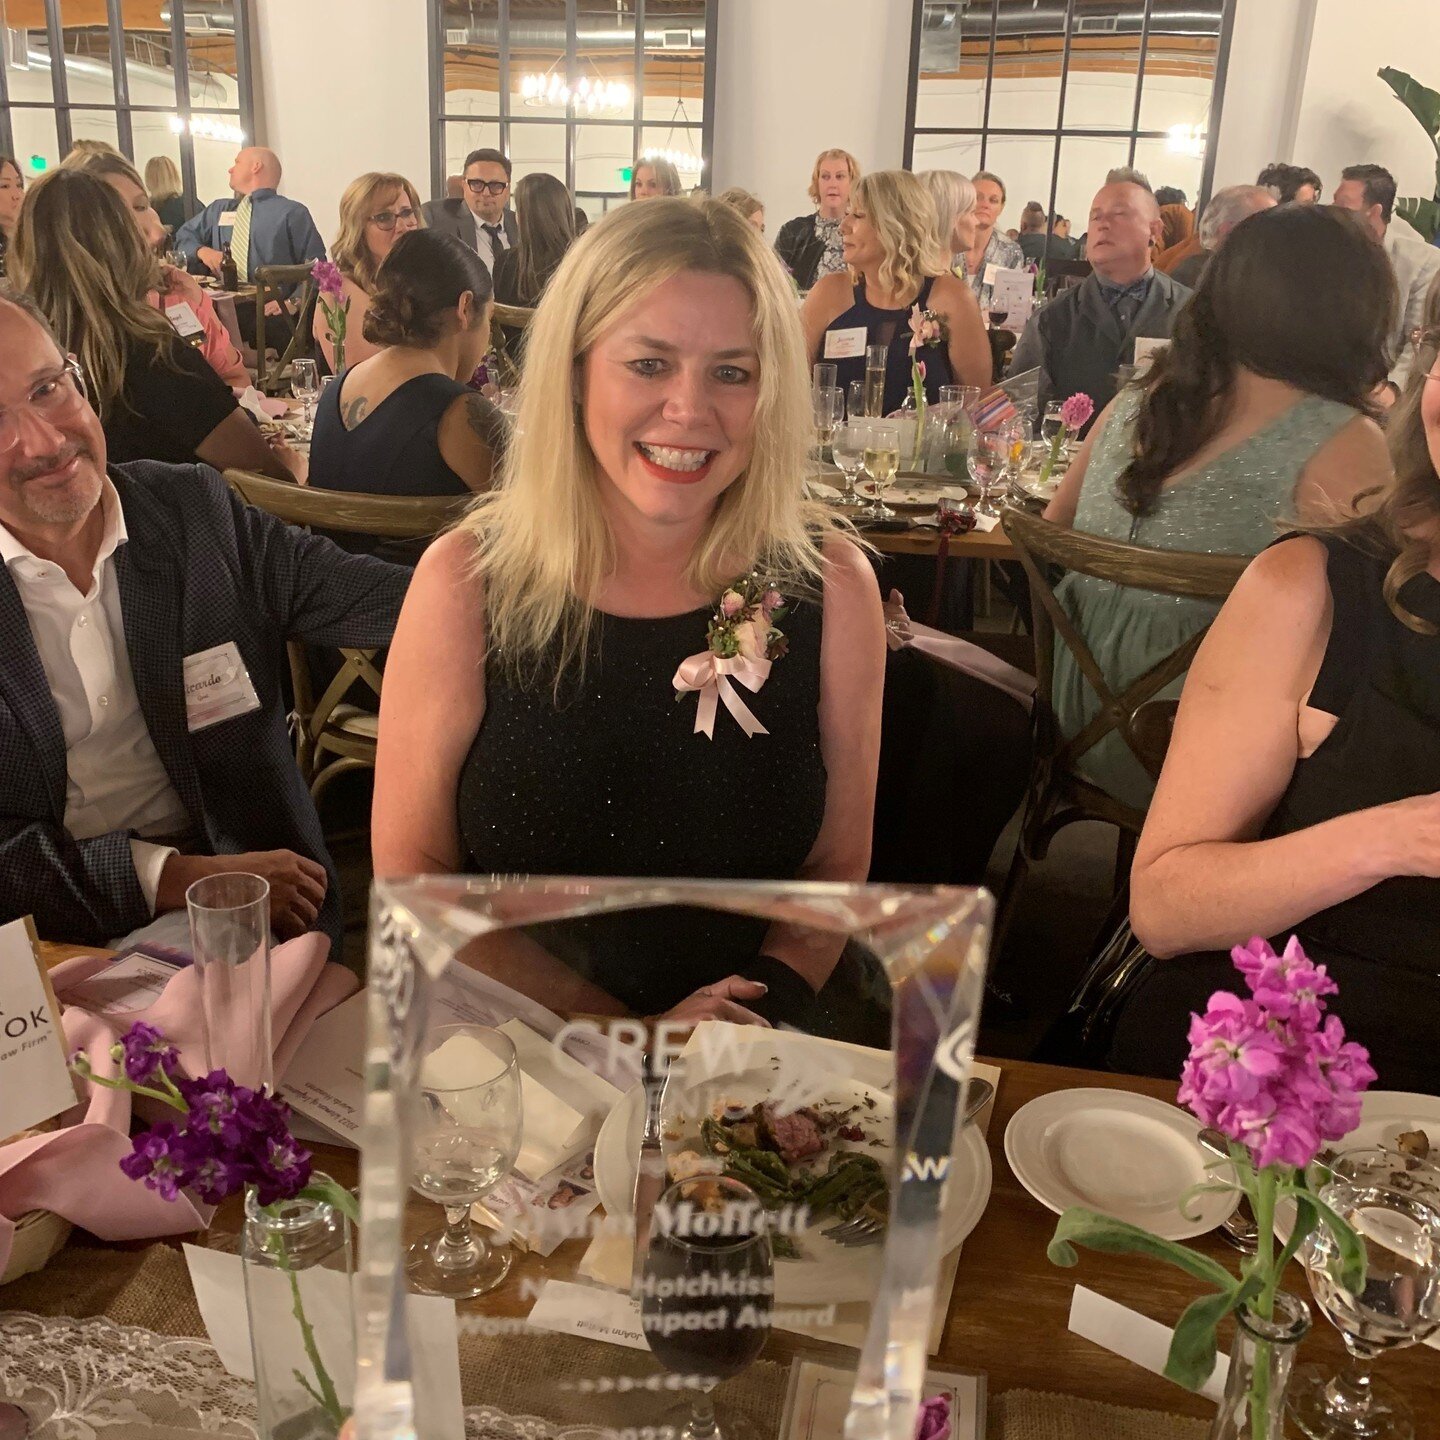 Cunningham Engineering had a great time last Thursday night supporting our very own JoAnn Moffett as she was recognized as the recipient of @crewsacto's Nancy Hotchkiss Woman of Impact Award. The award recognized JoAnn&rsquo;s impact on the local com